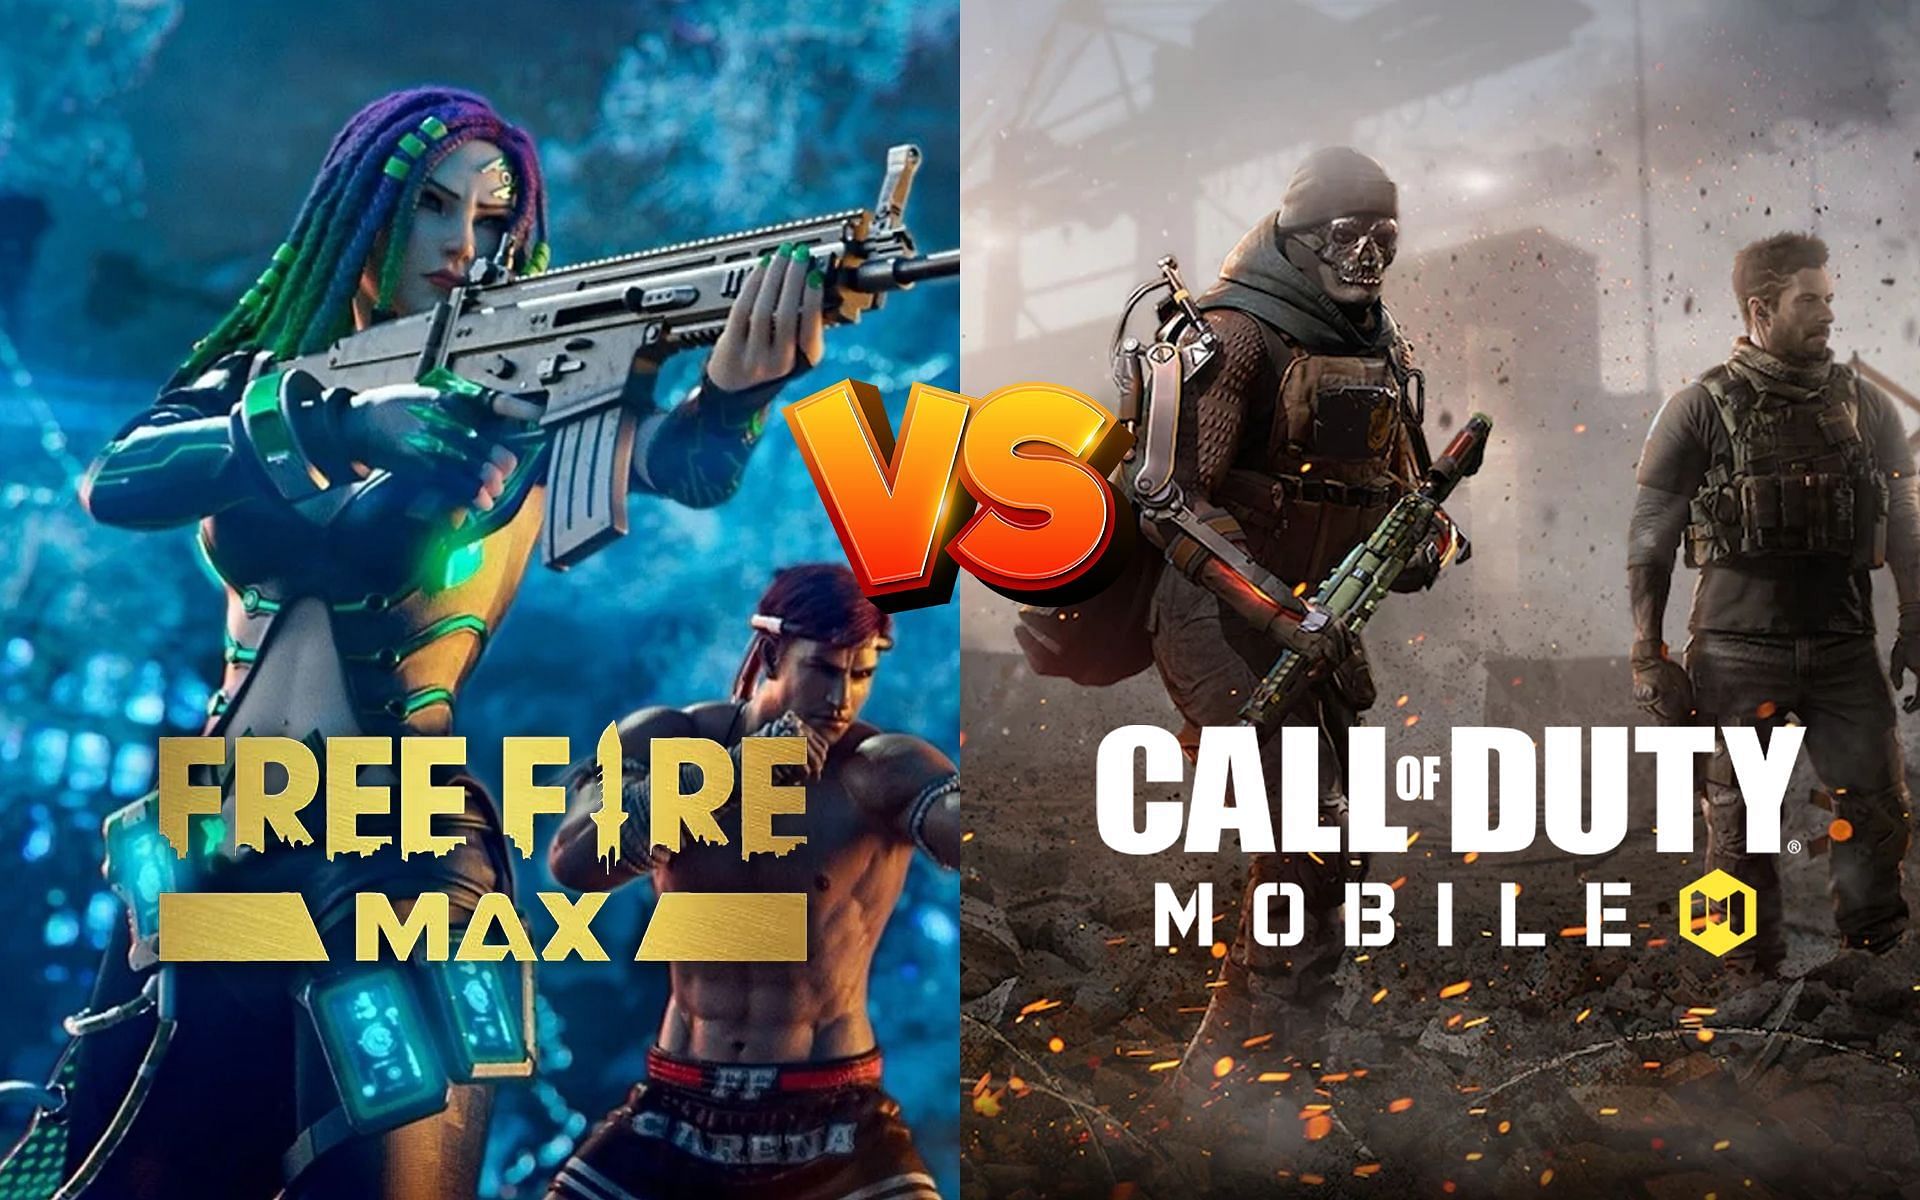 Call of duty mobile + free fire